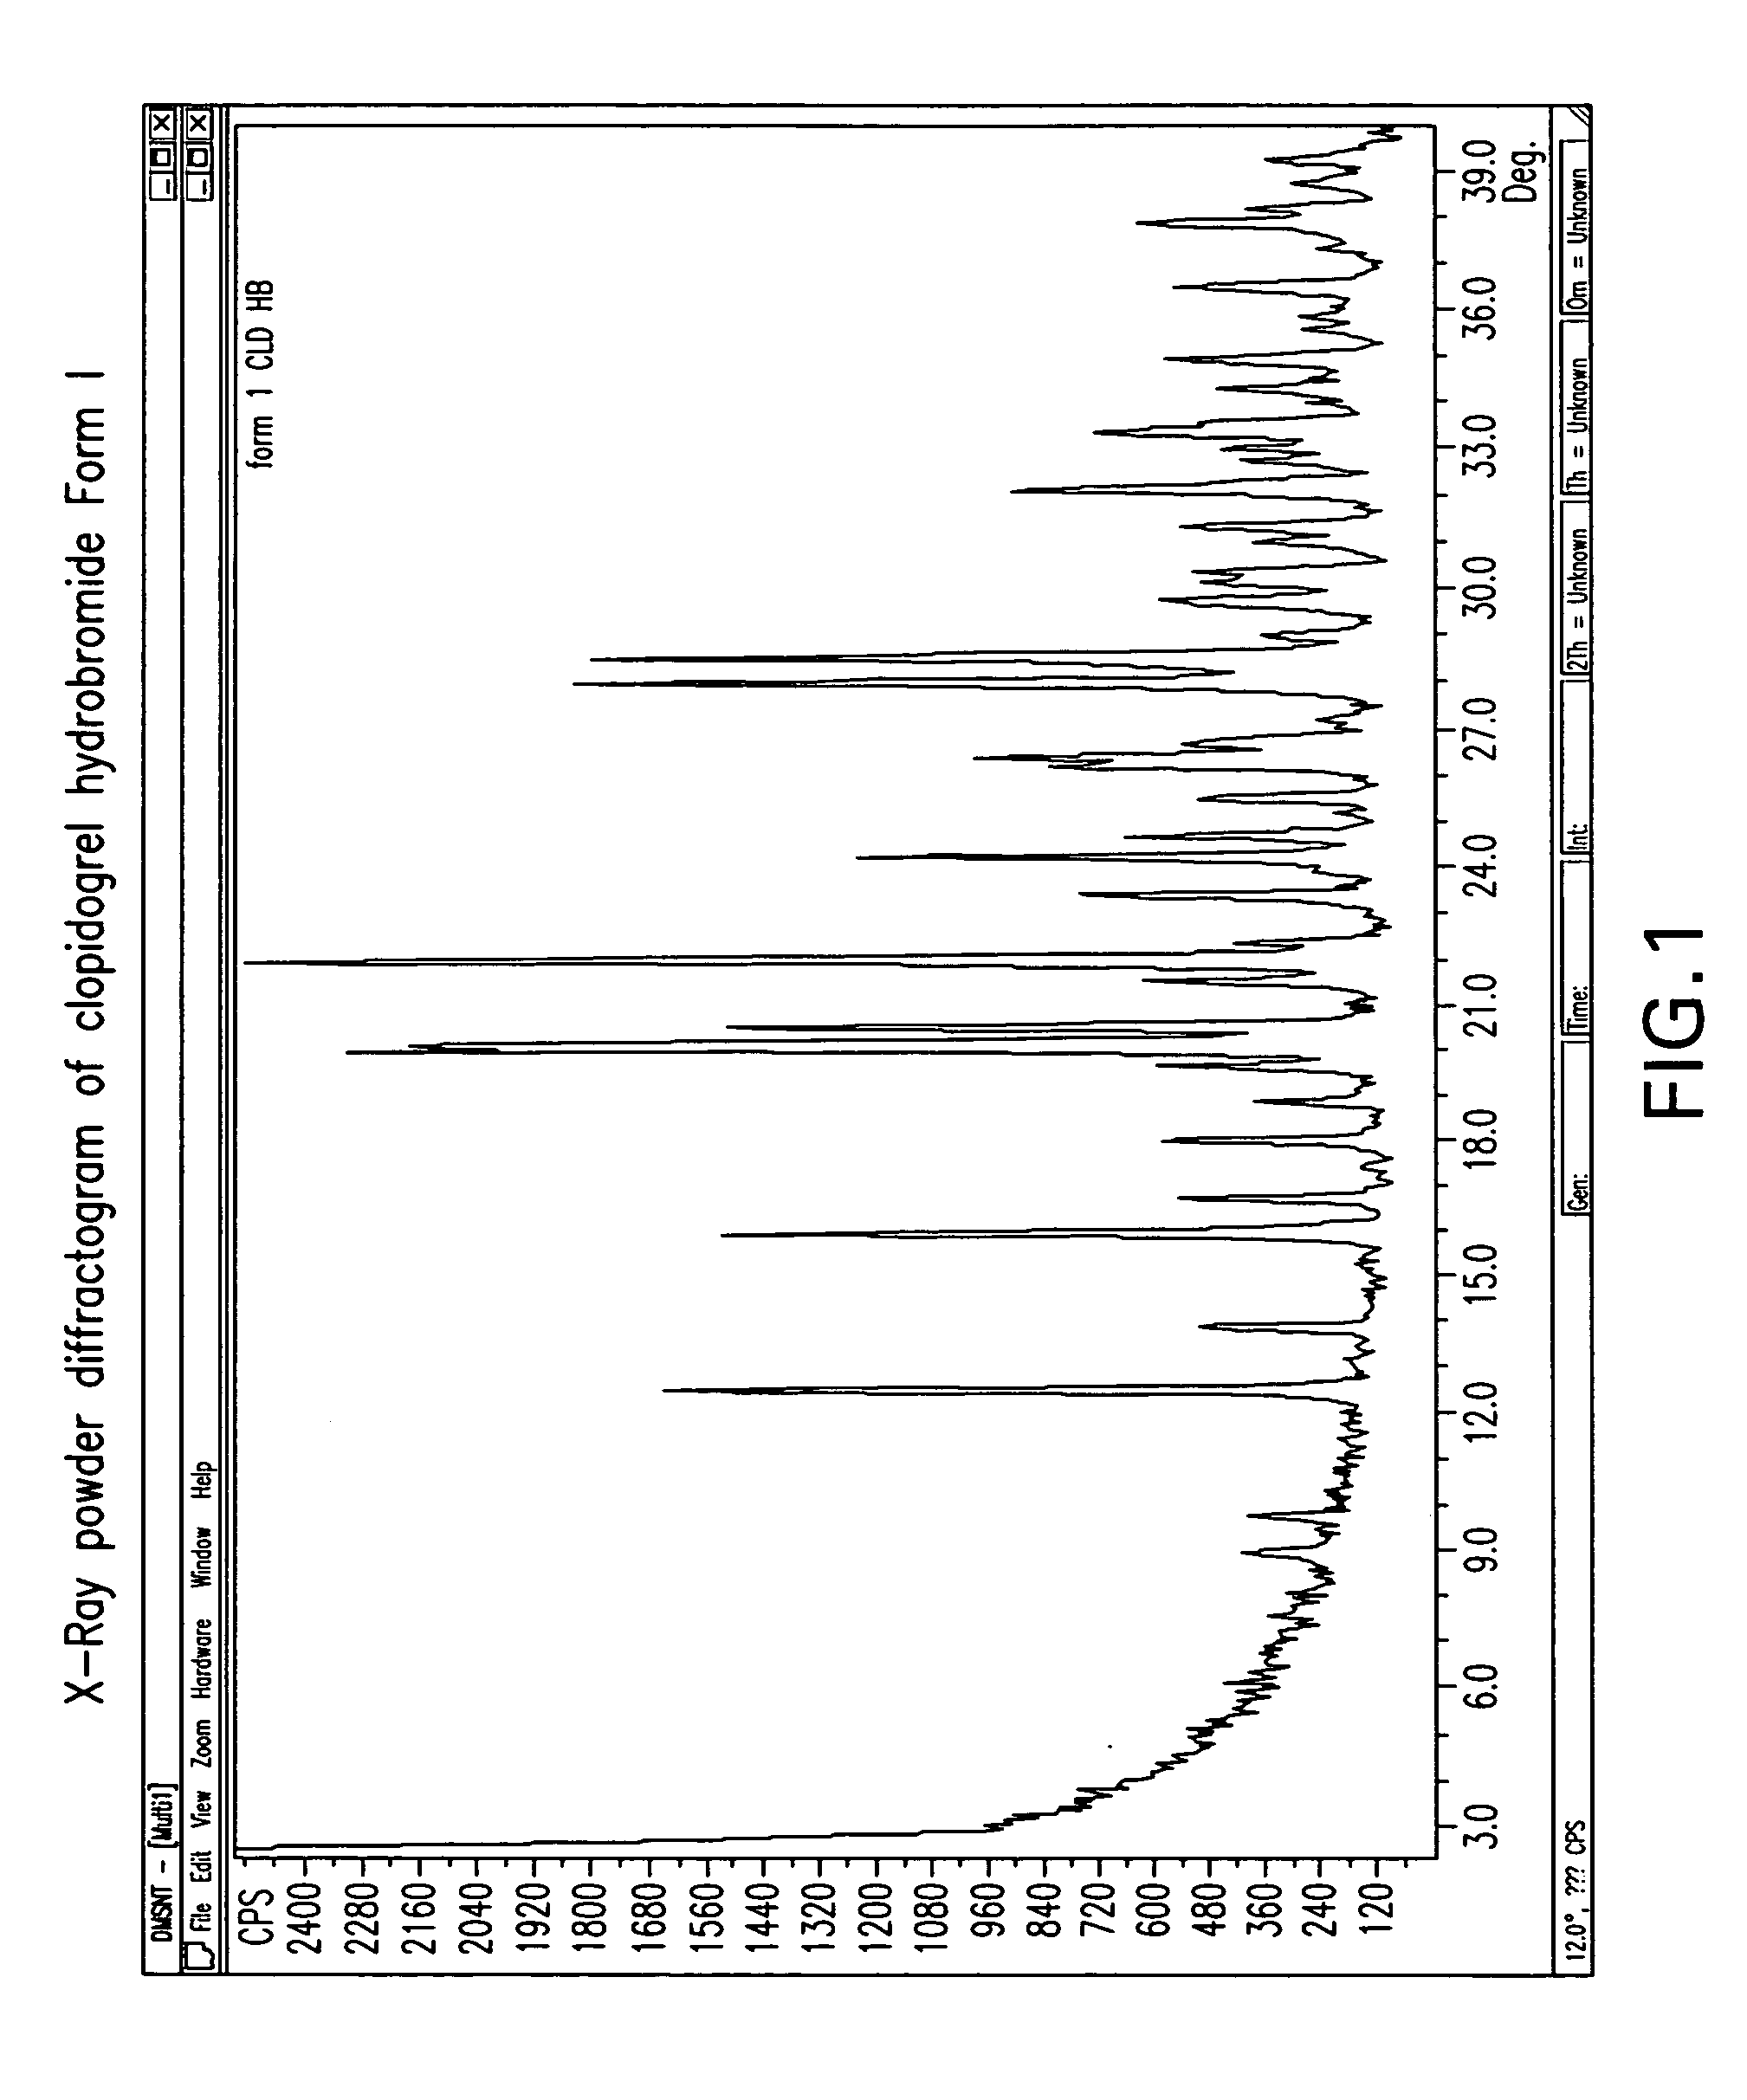 Crystalline clopidogrel hydrobromide and processes for preparation thereof